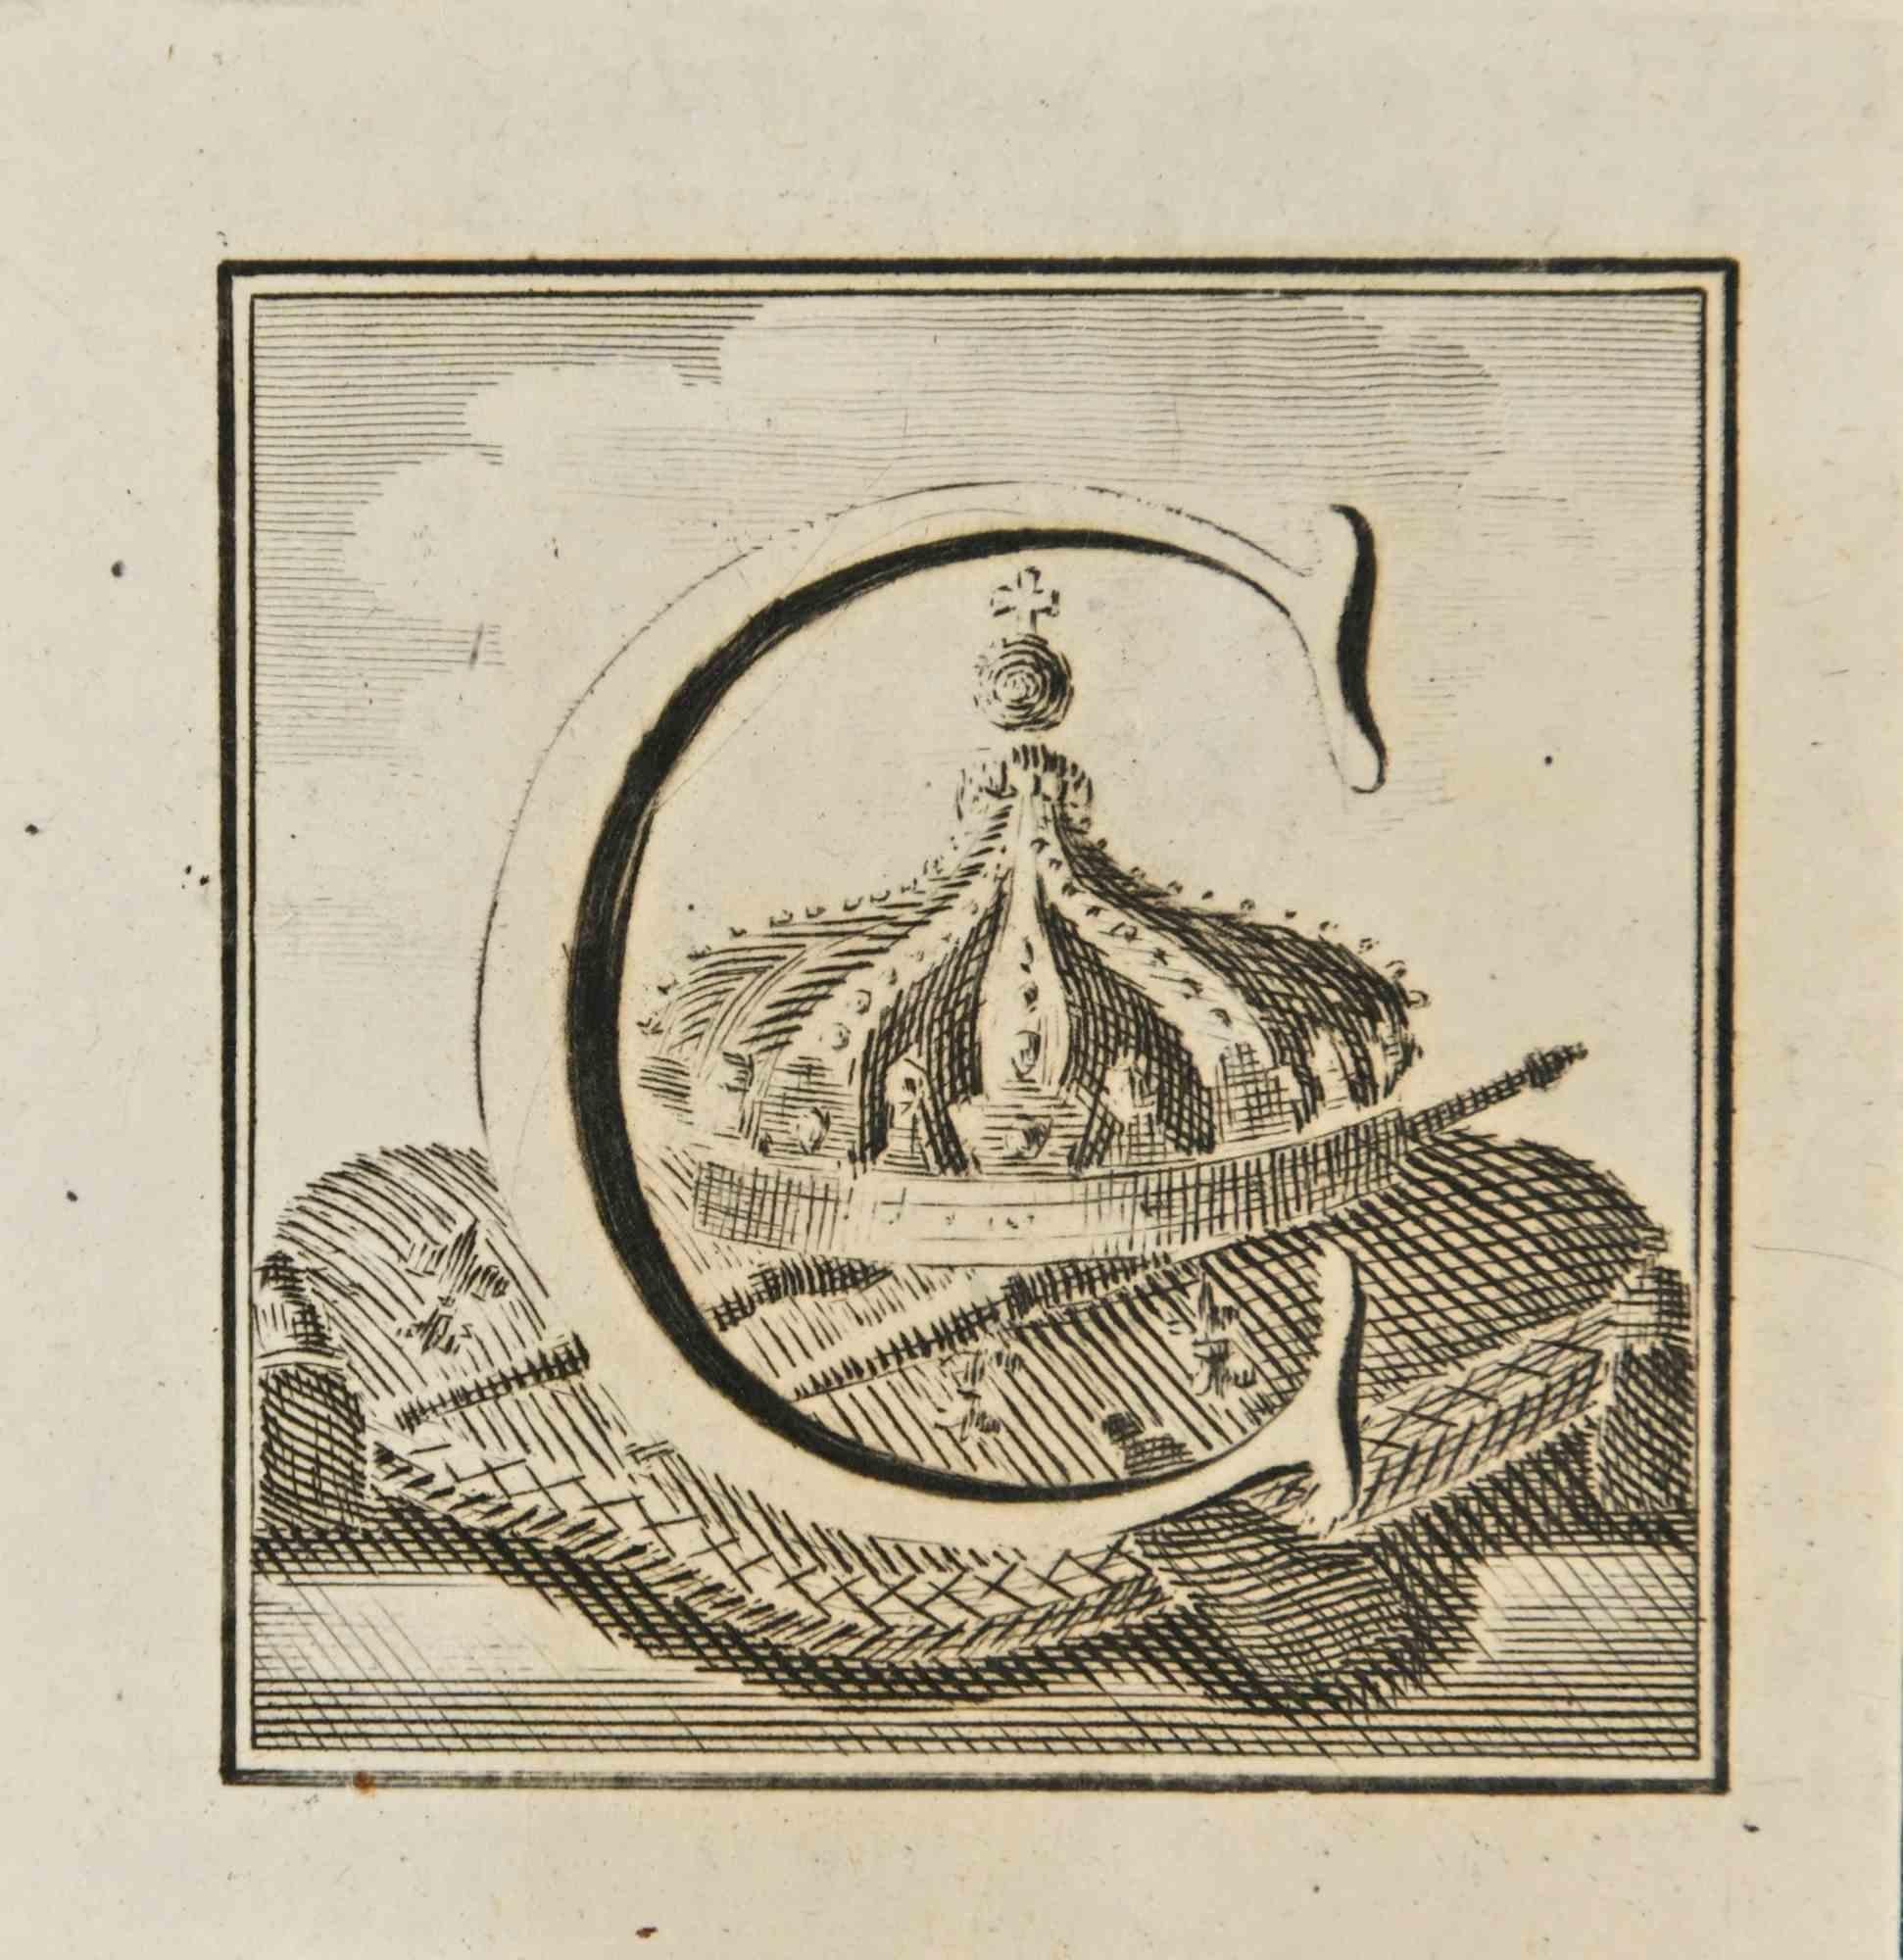 Letter of the Alphabet C,  from the series "Antiquities of Herculaneum", is an etching on paper realized by Luigi Vanvitelli in the 18th century.

Good conditions with minor foxing.

The etching belongs to the print suite “Antiquities of Herculaneum